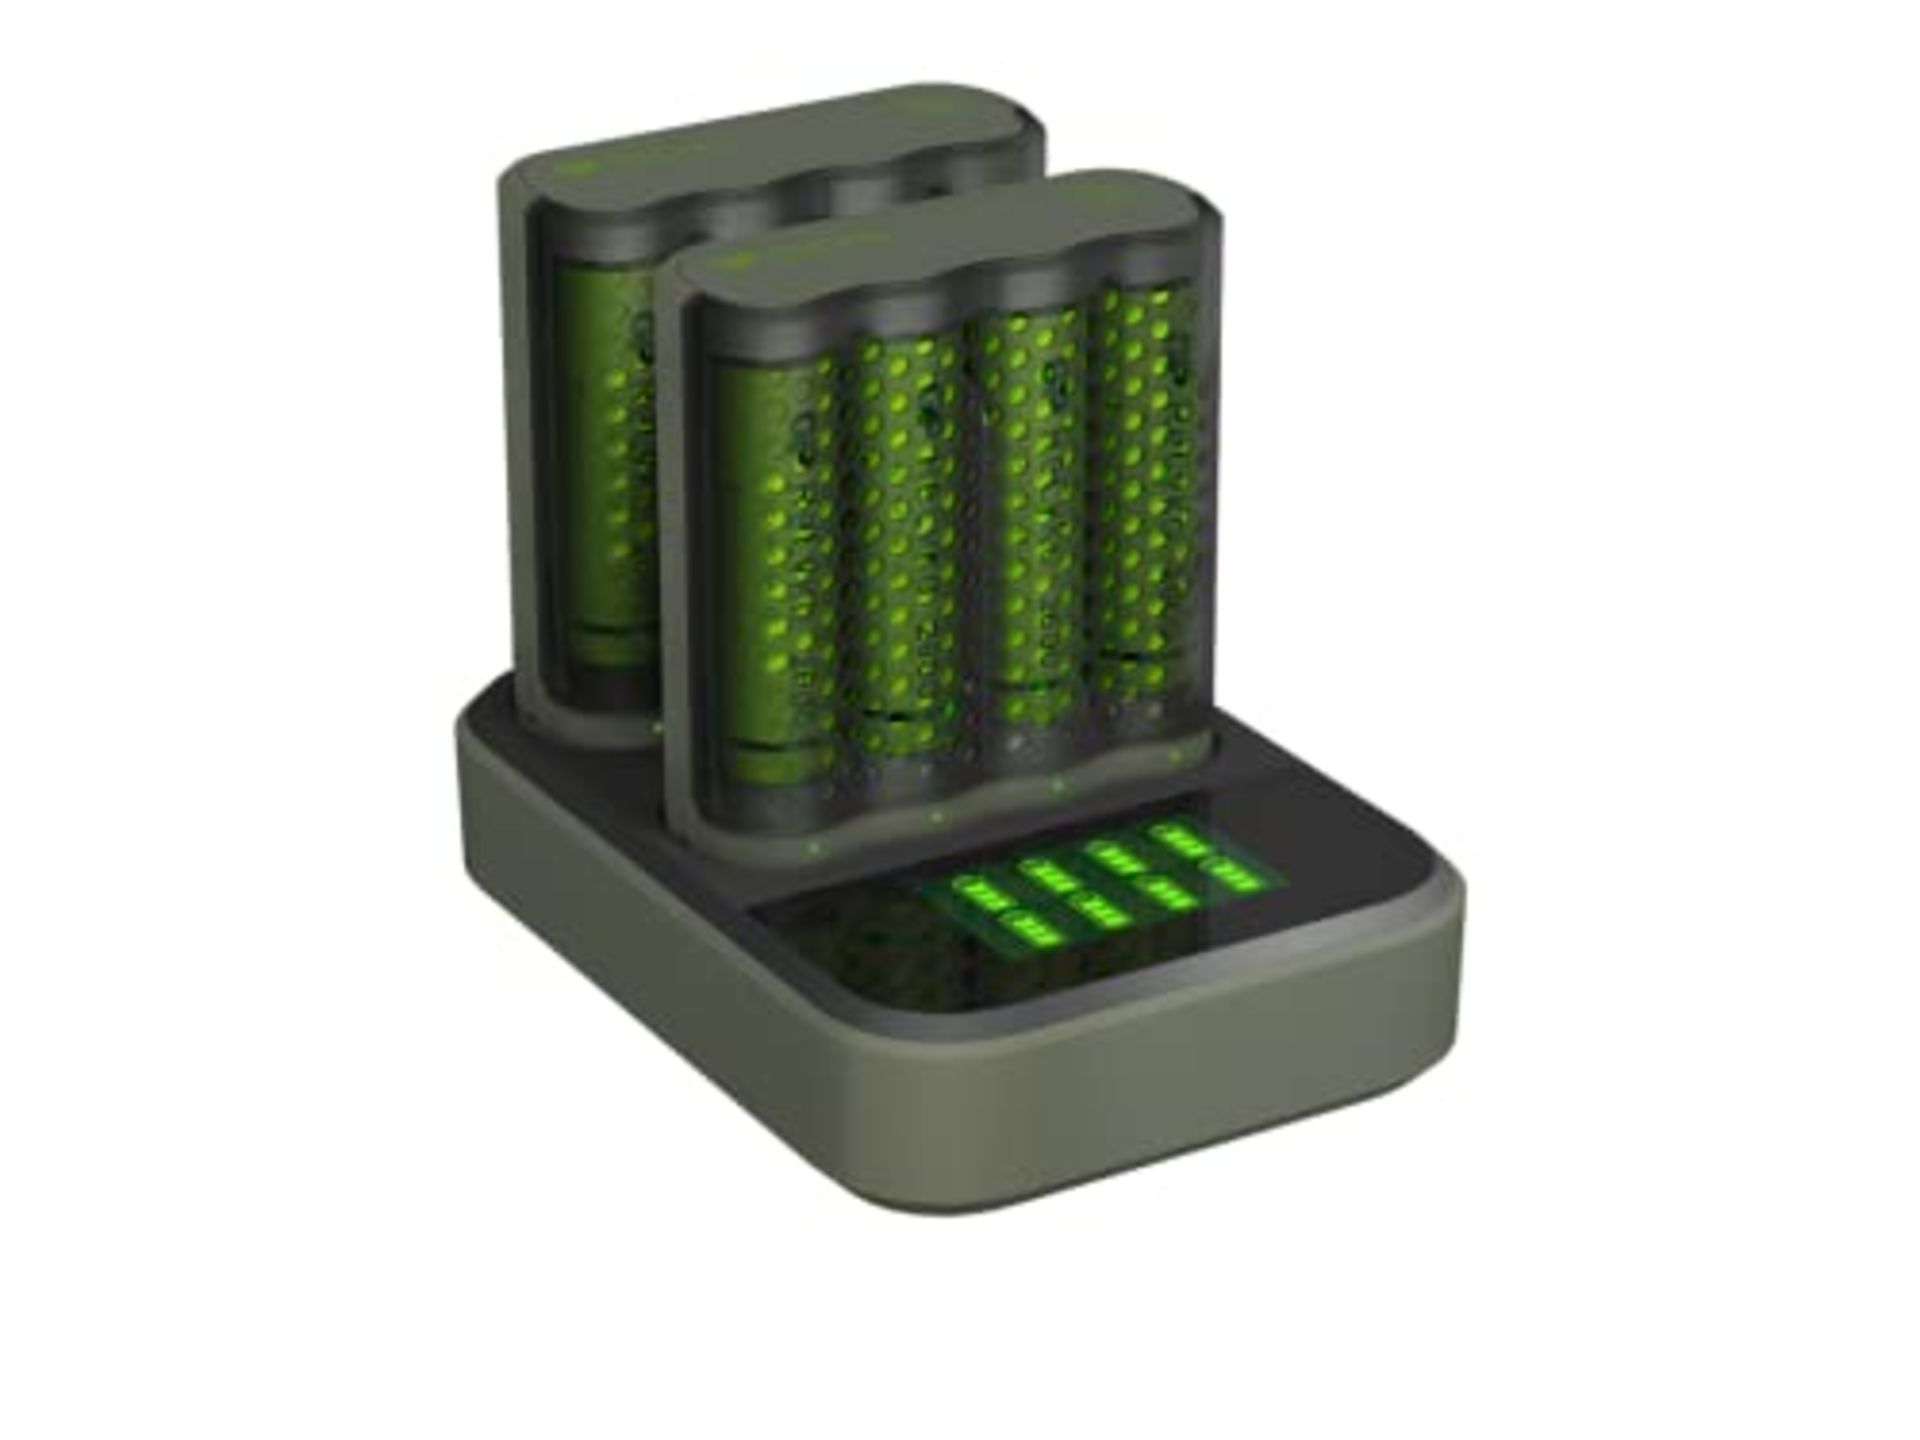 Quick USB Charger with 8 Rechargeable AA Batteries 2600 mAh included and LED display | - Image 4 of 6